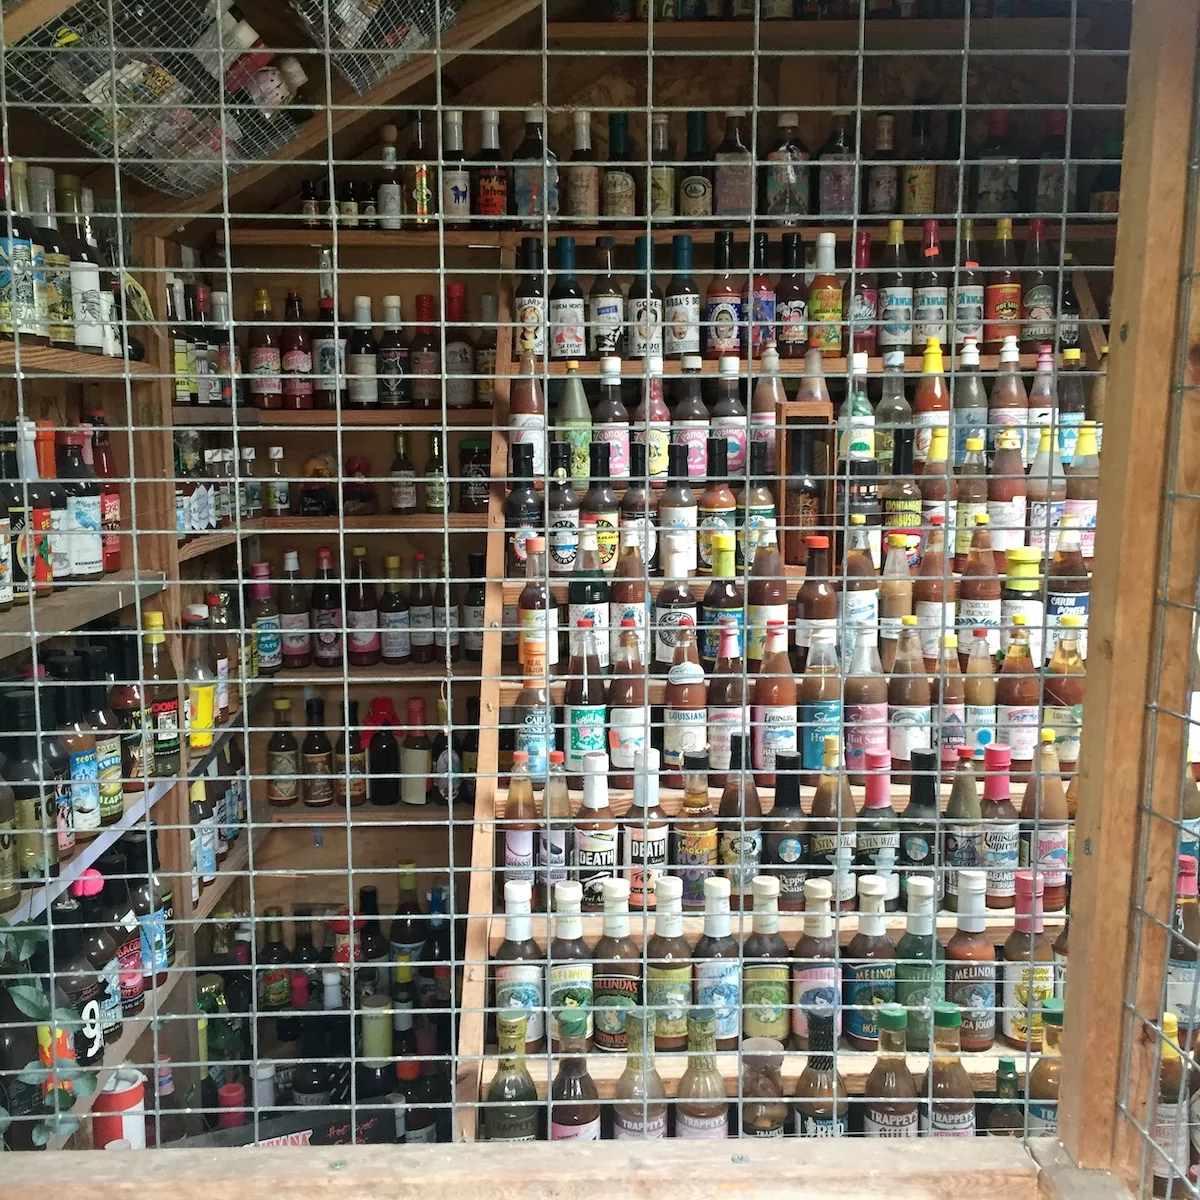 Collection of hot sauces in the Hot Sauce House at the Abita Mystery House in Abita Springs, Louisiana